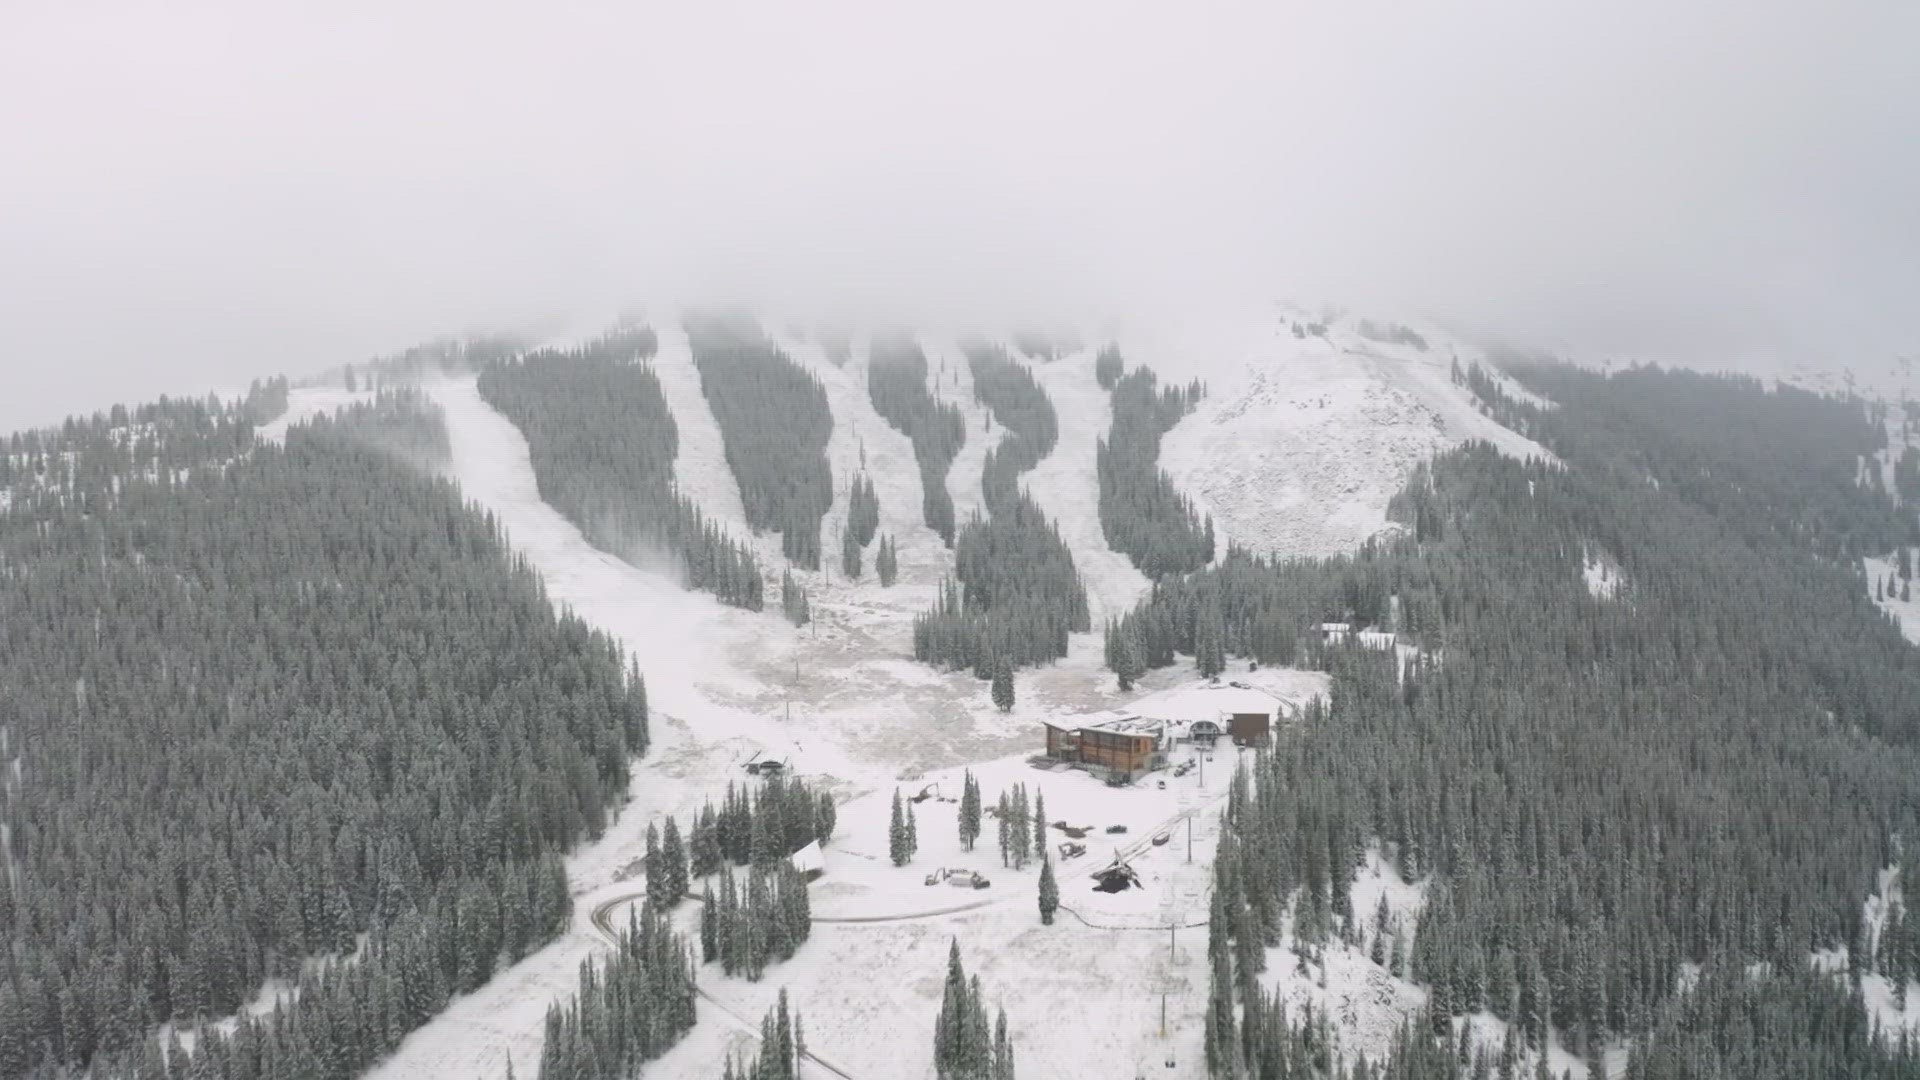 Mother Nature hasn't helped Colorado's ski resorts much so far this season. They're able to open mostly because of snowmaking.